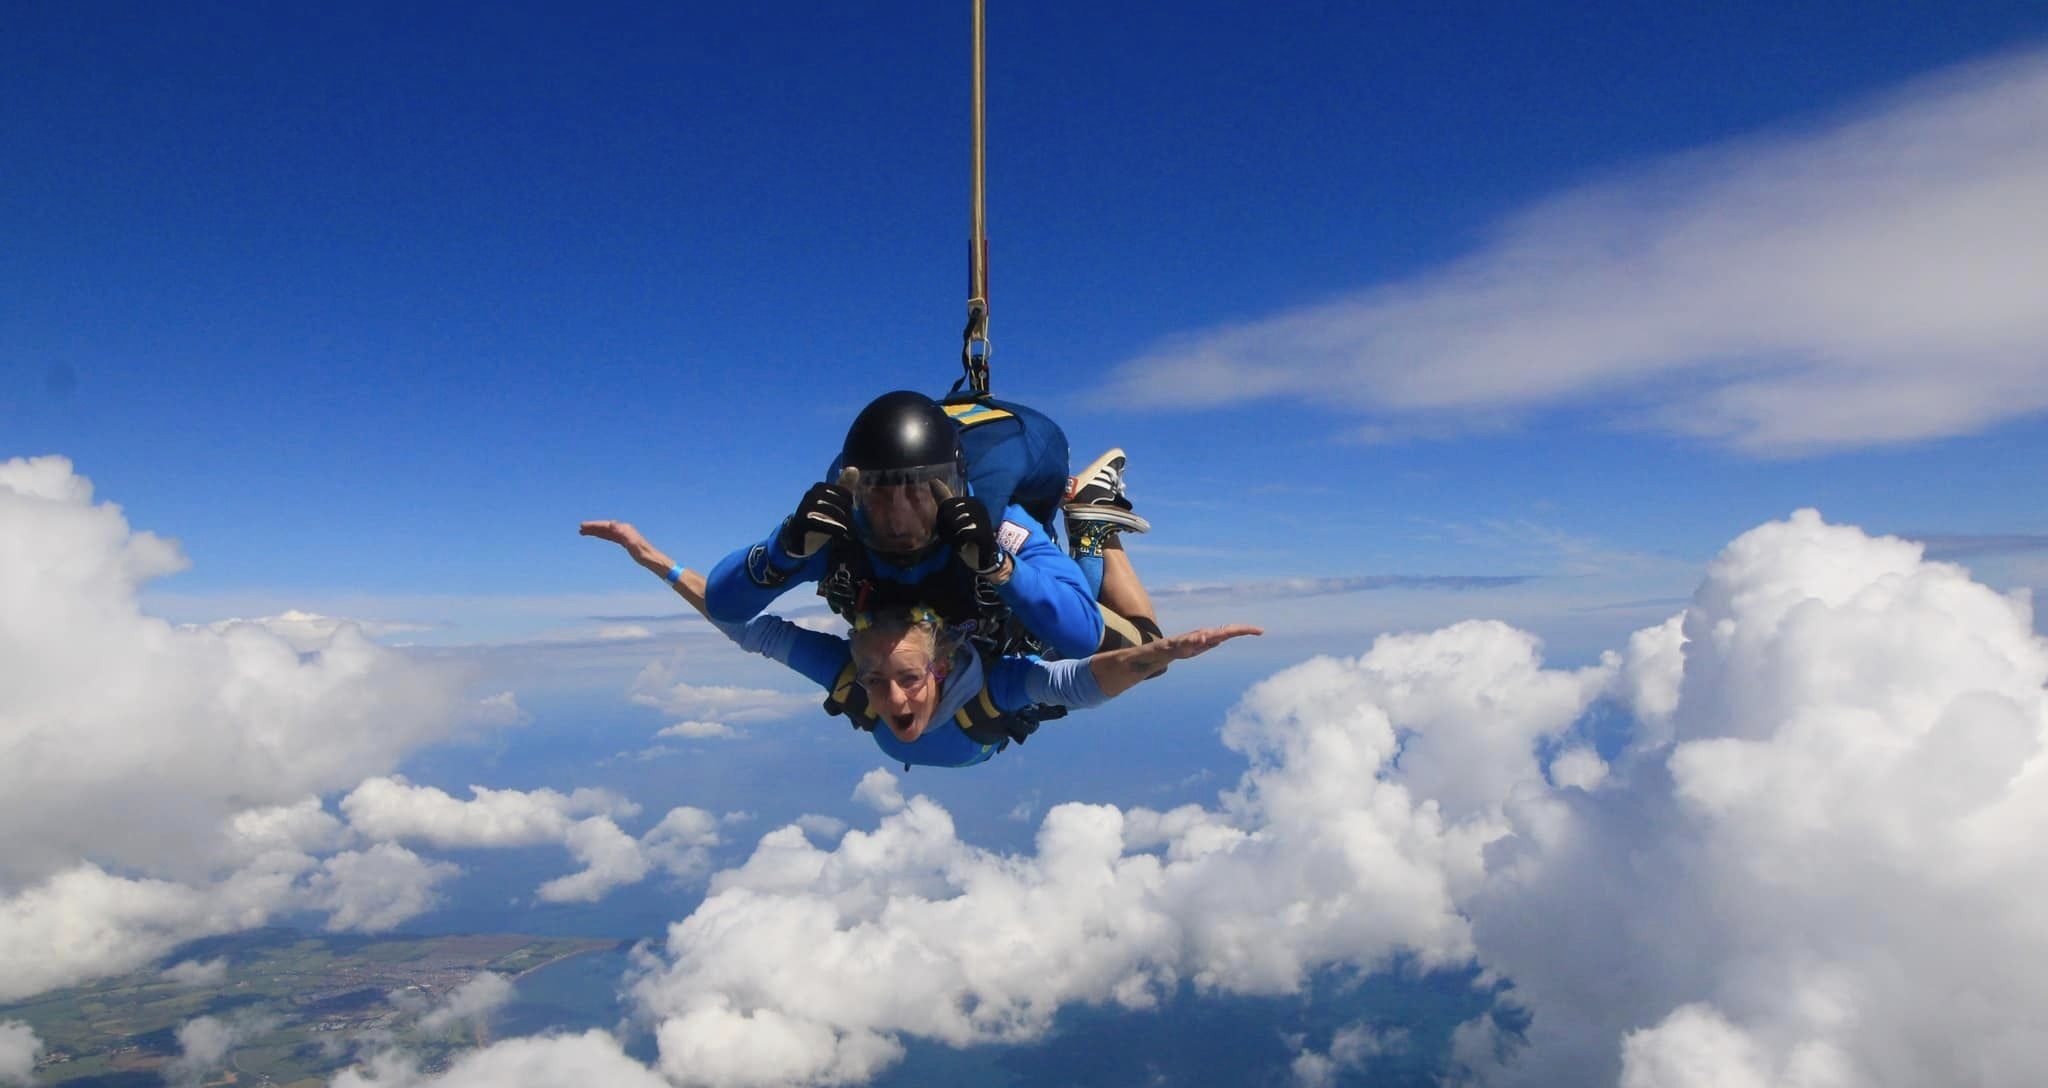 Hayley skydiving from 10,000ft